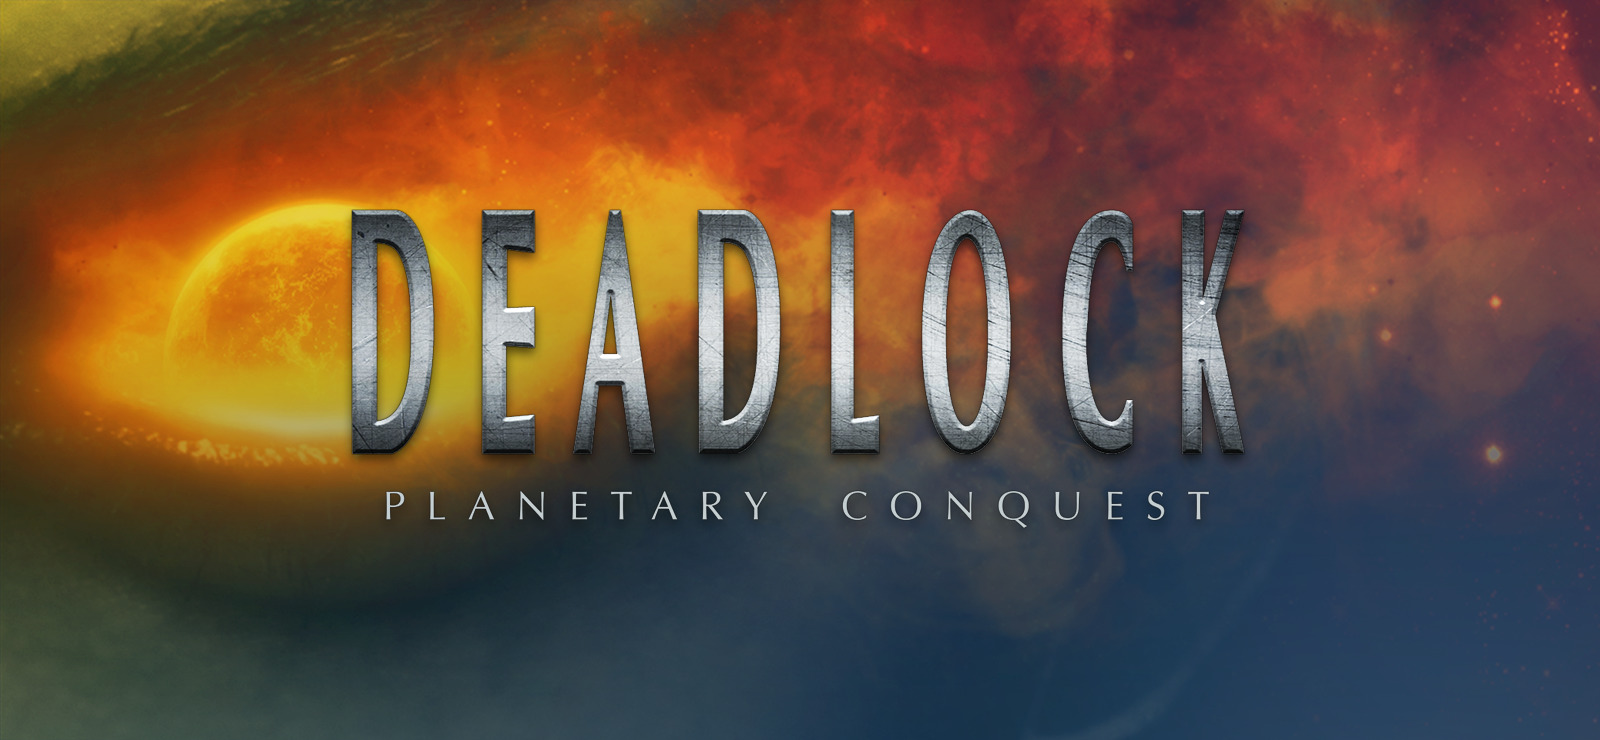 play deadlock planetary conquest online